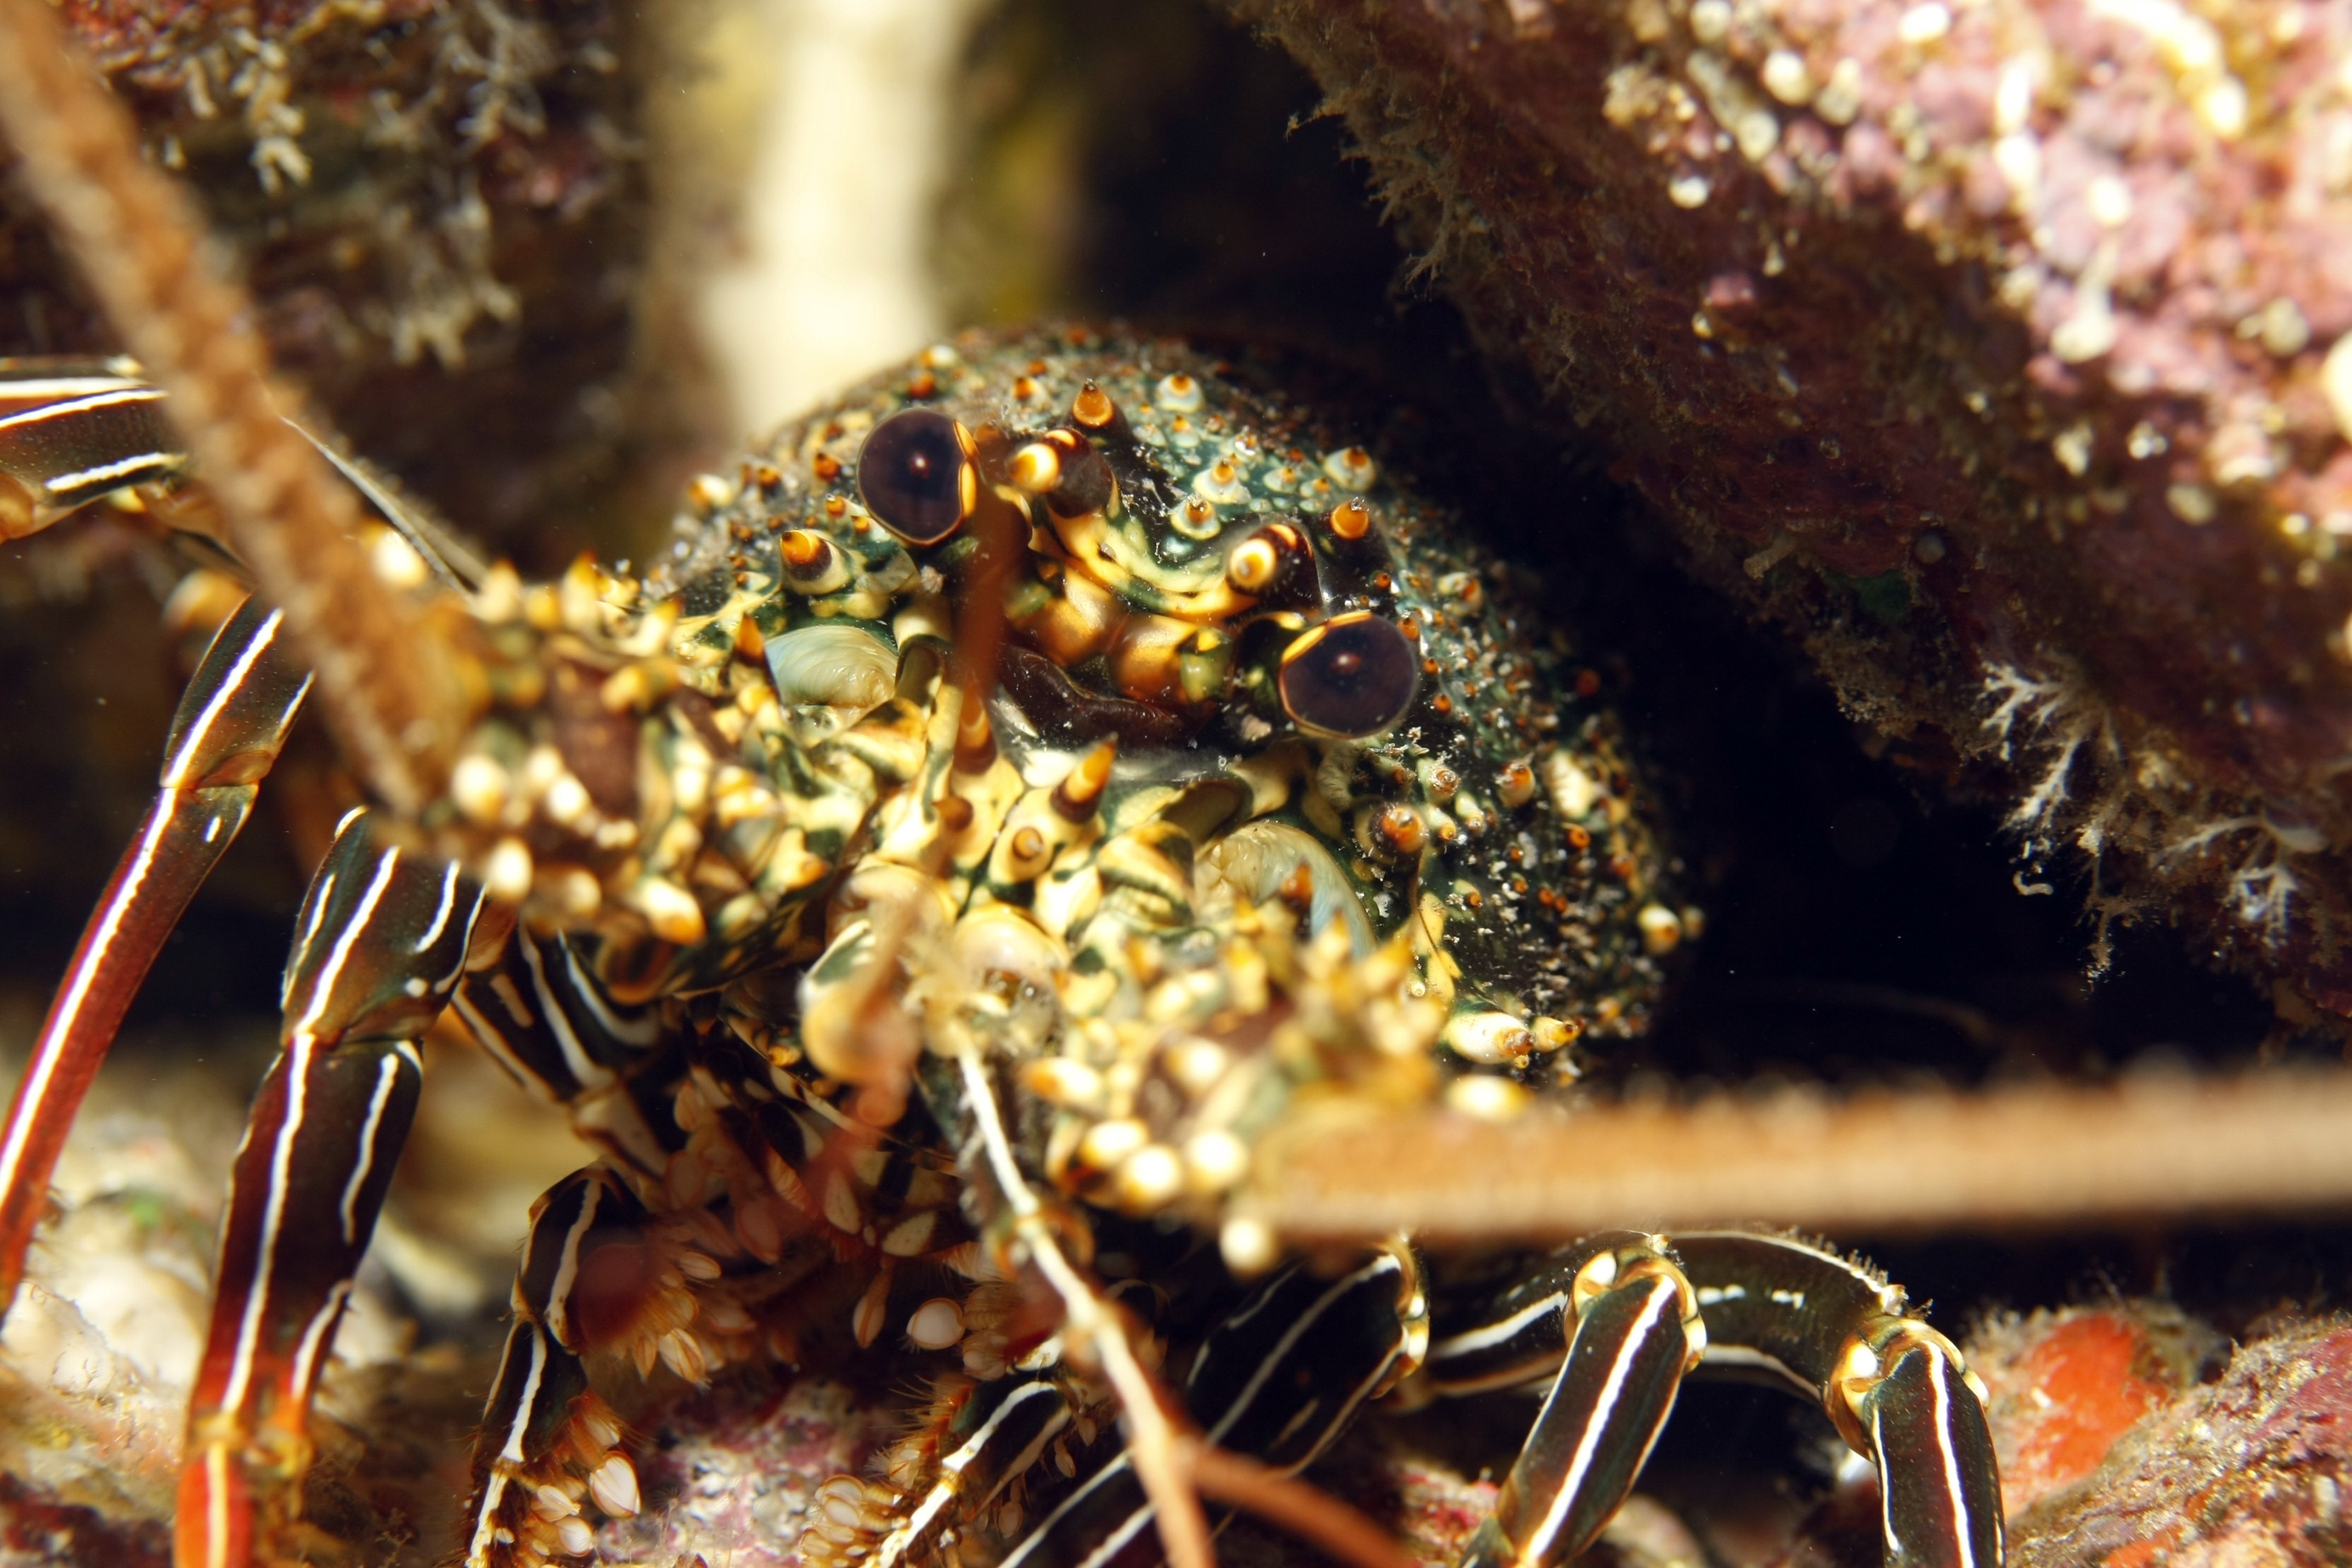 brown and yellow lobster